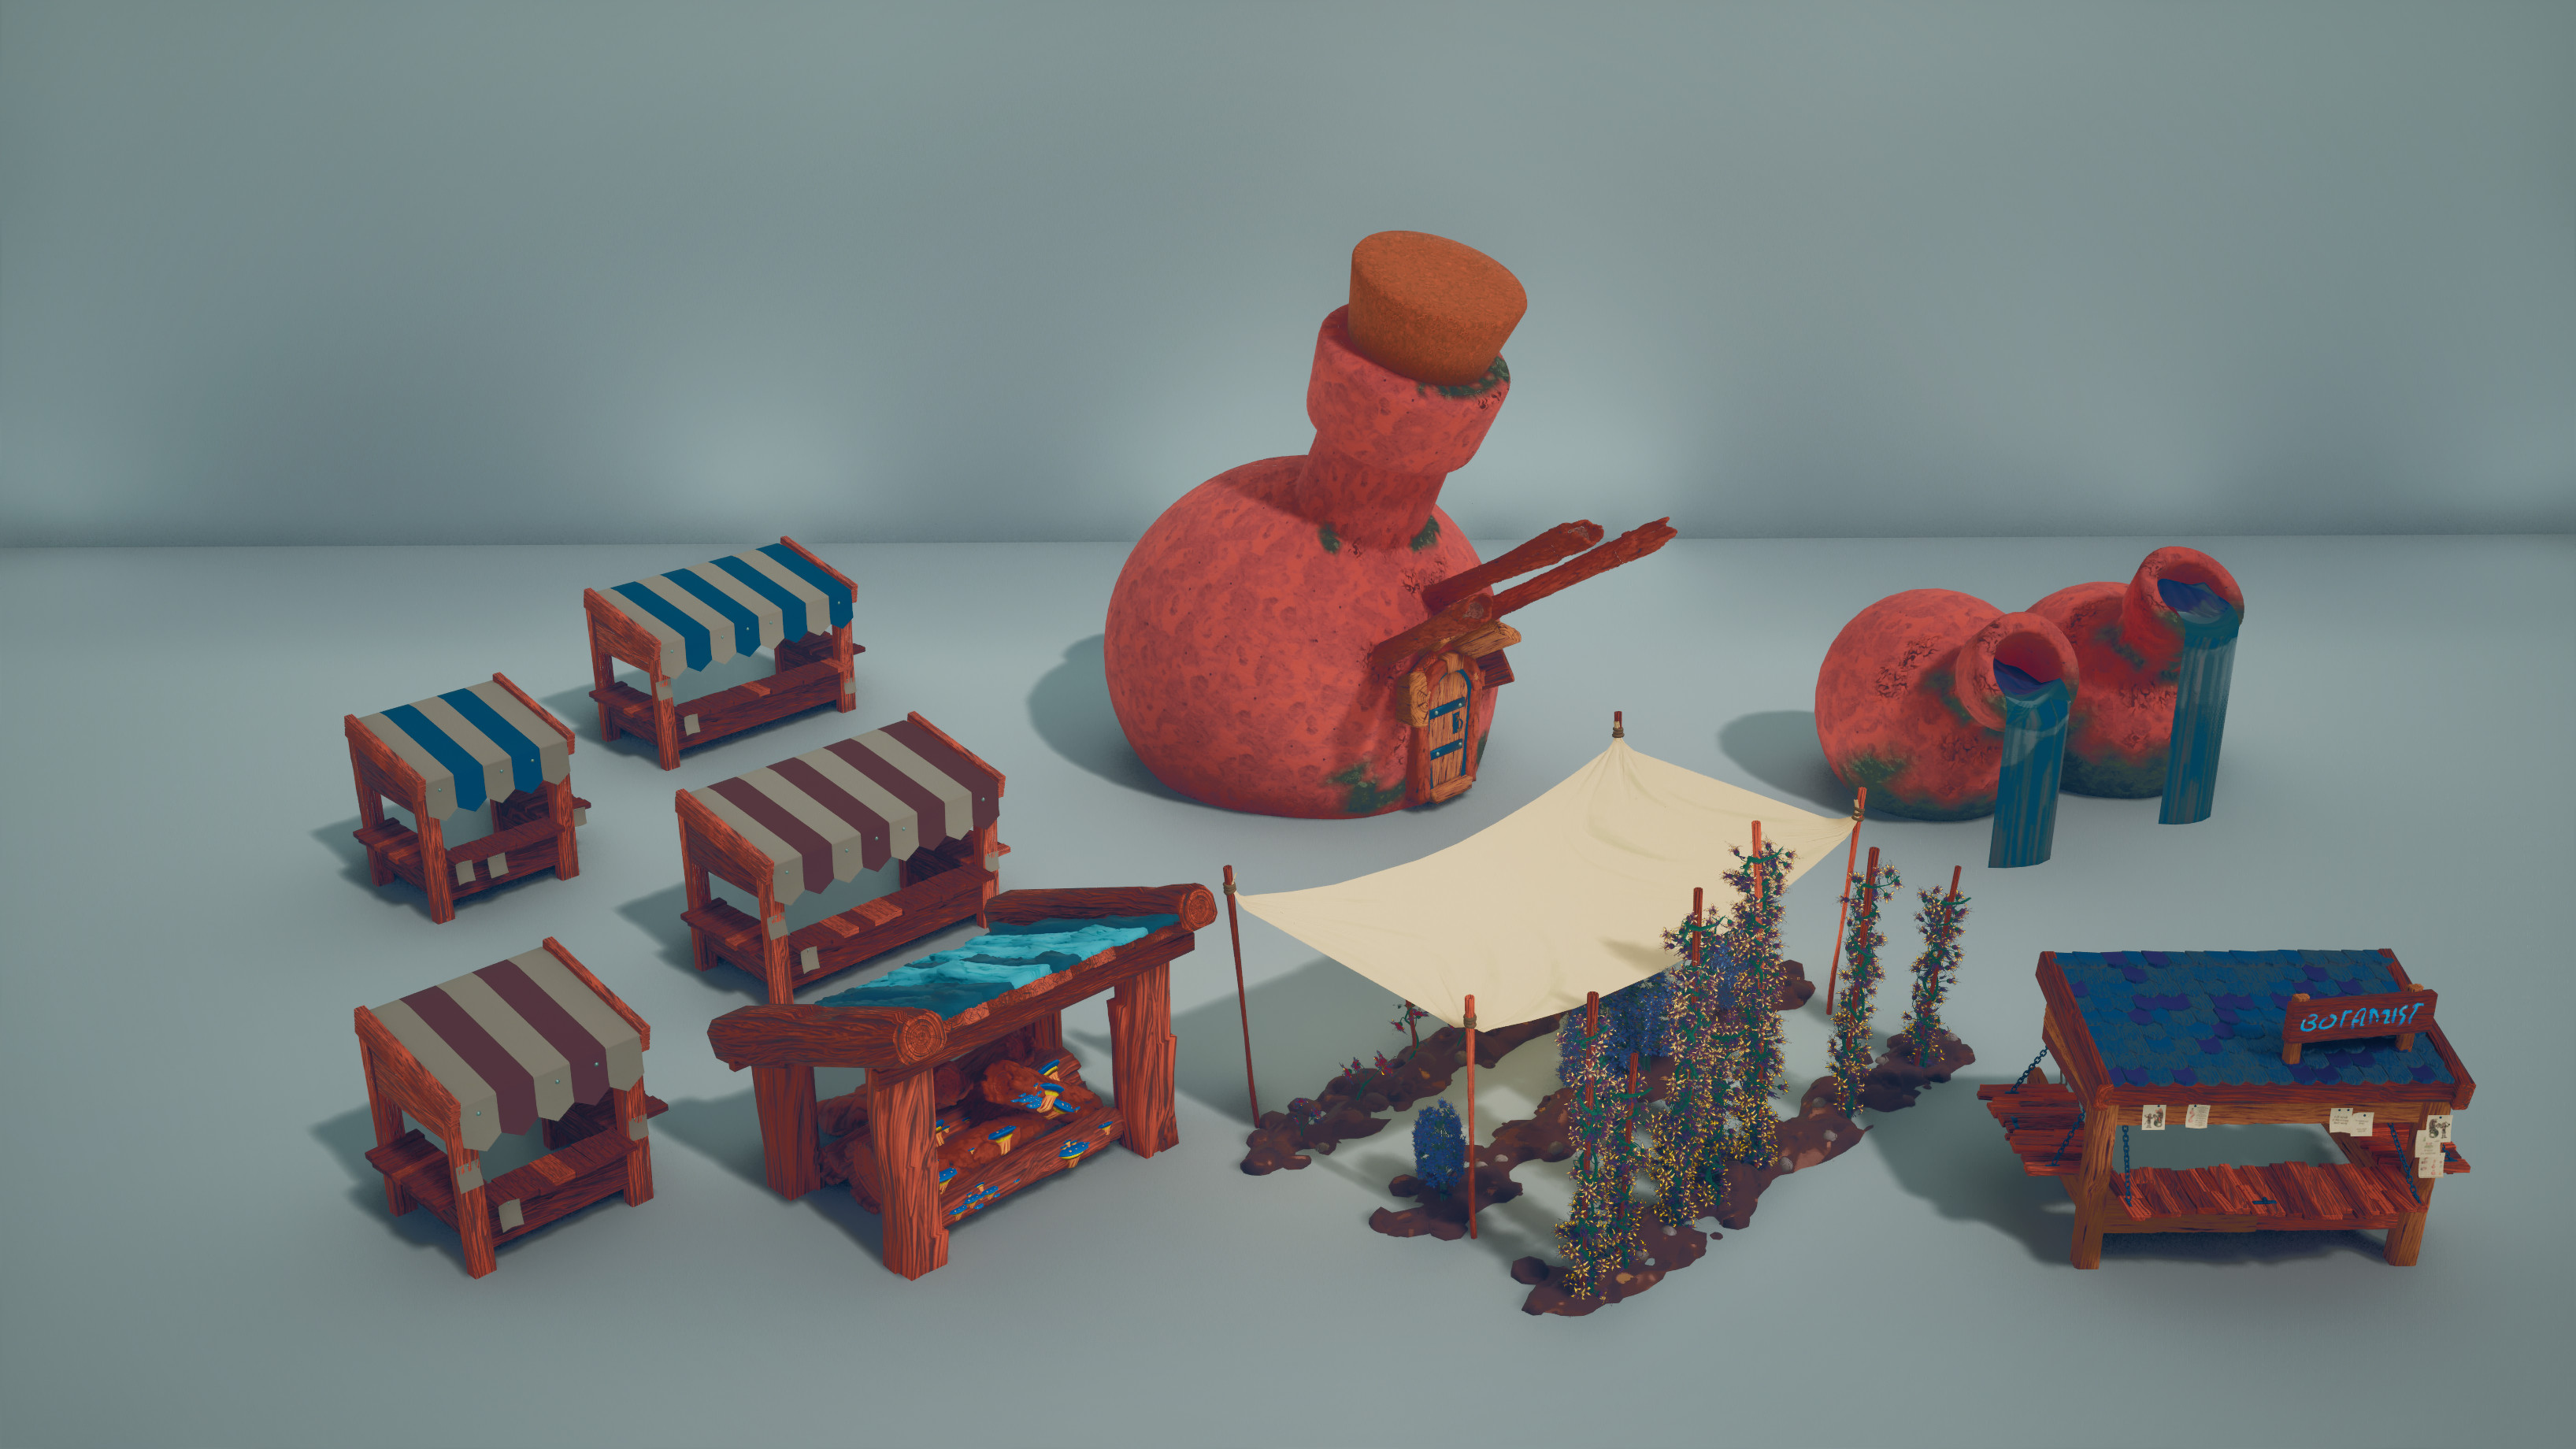 The "hero assets" of the scene, meaning I didn't use the modular kit for those